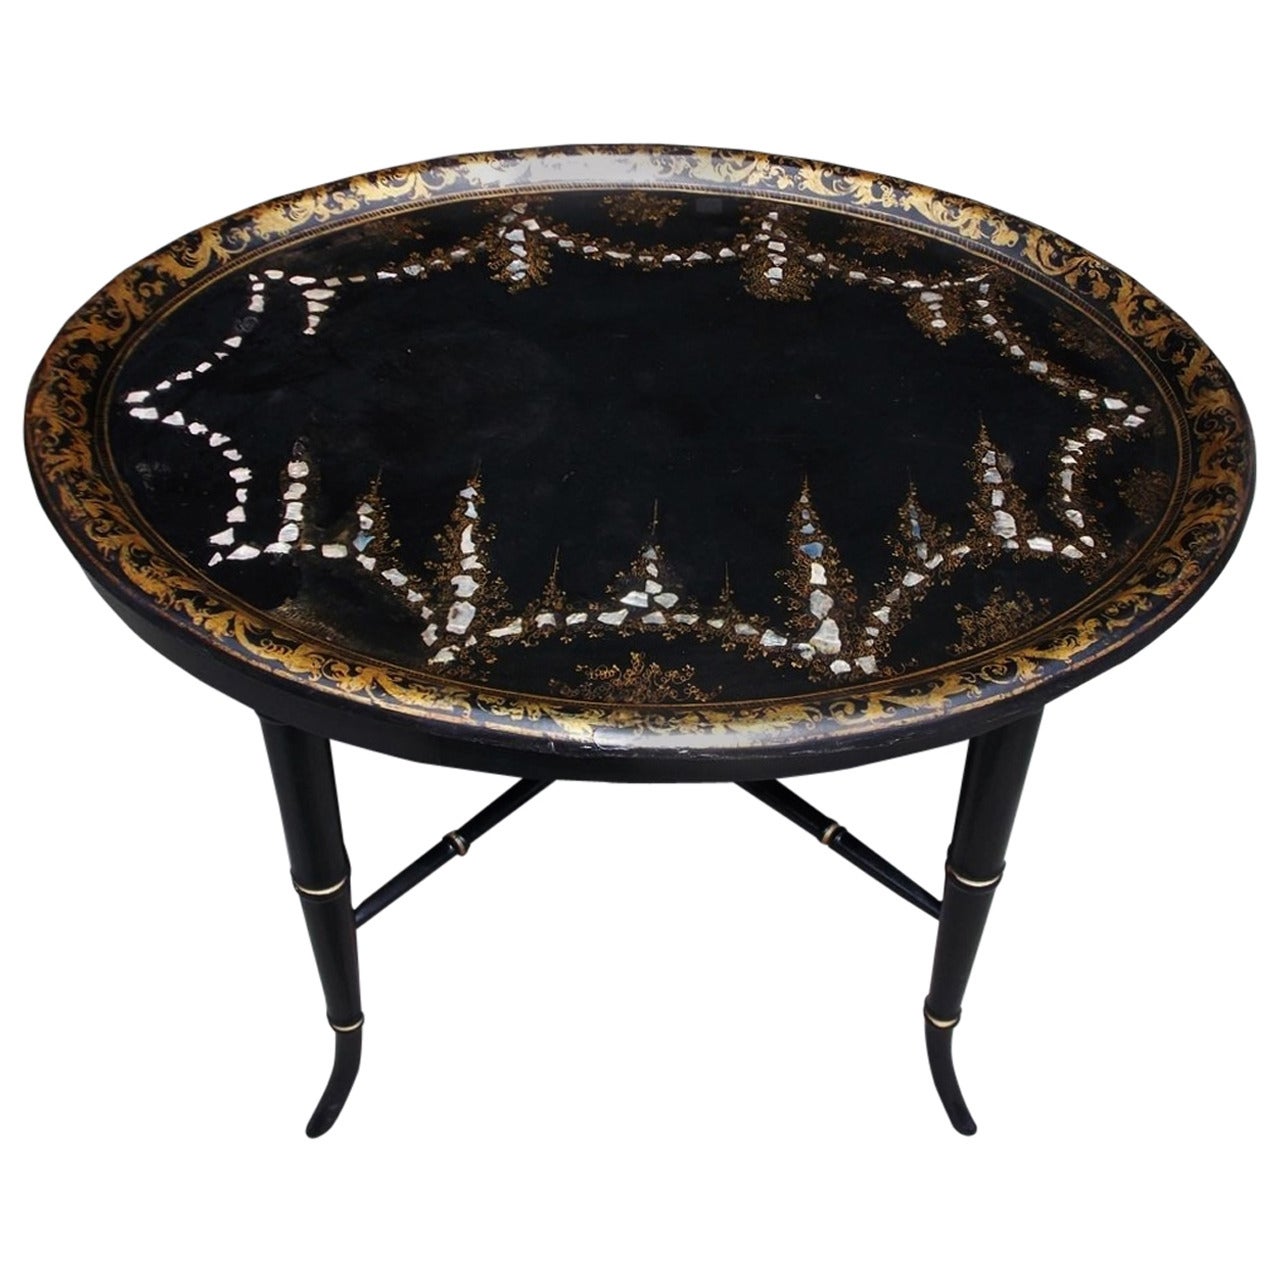 English Regency Papier-Mâché Inlaid Mother of Pearl Tray on Stand, Circa 1820